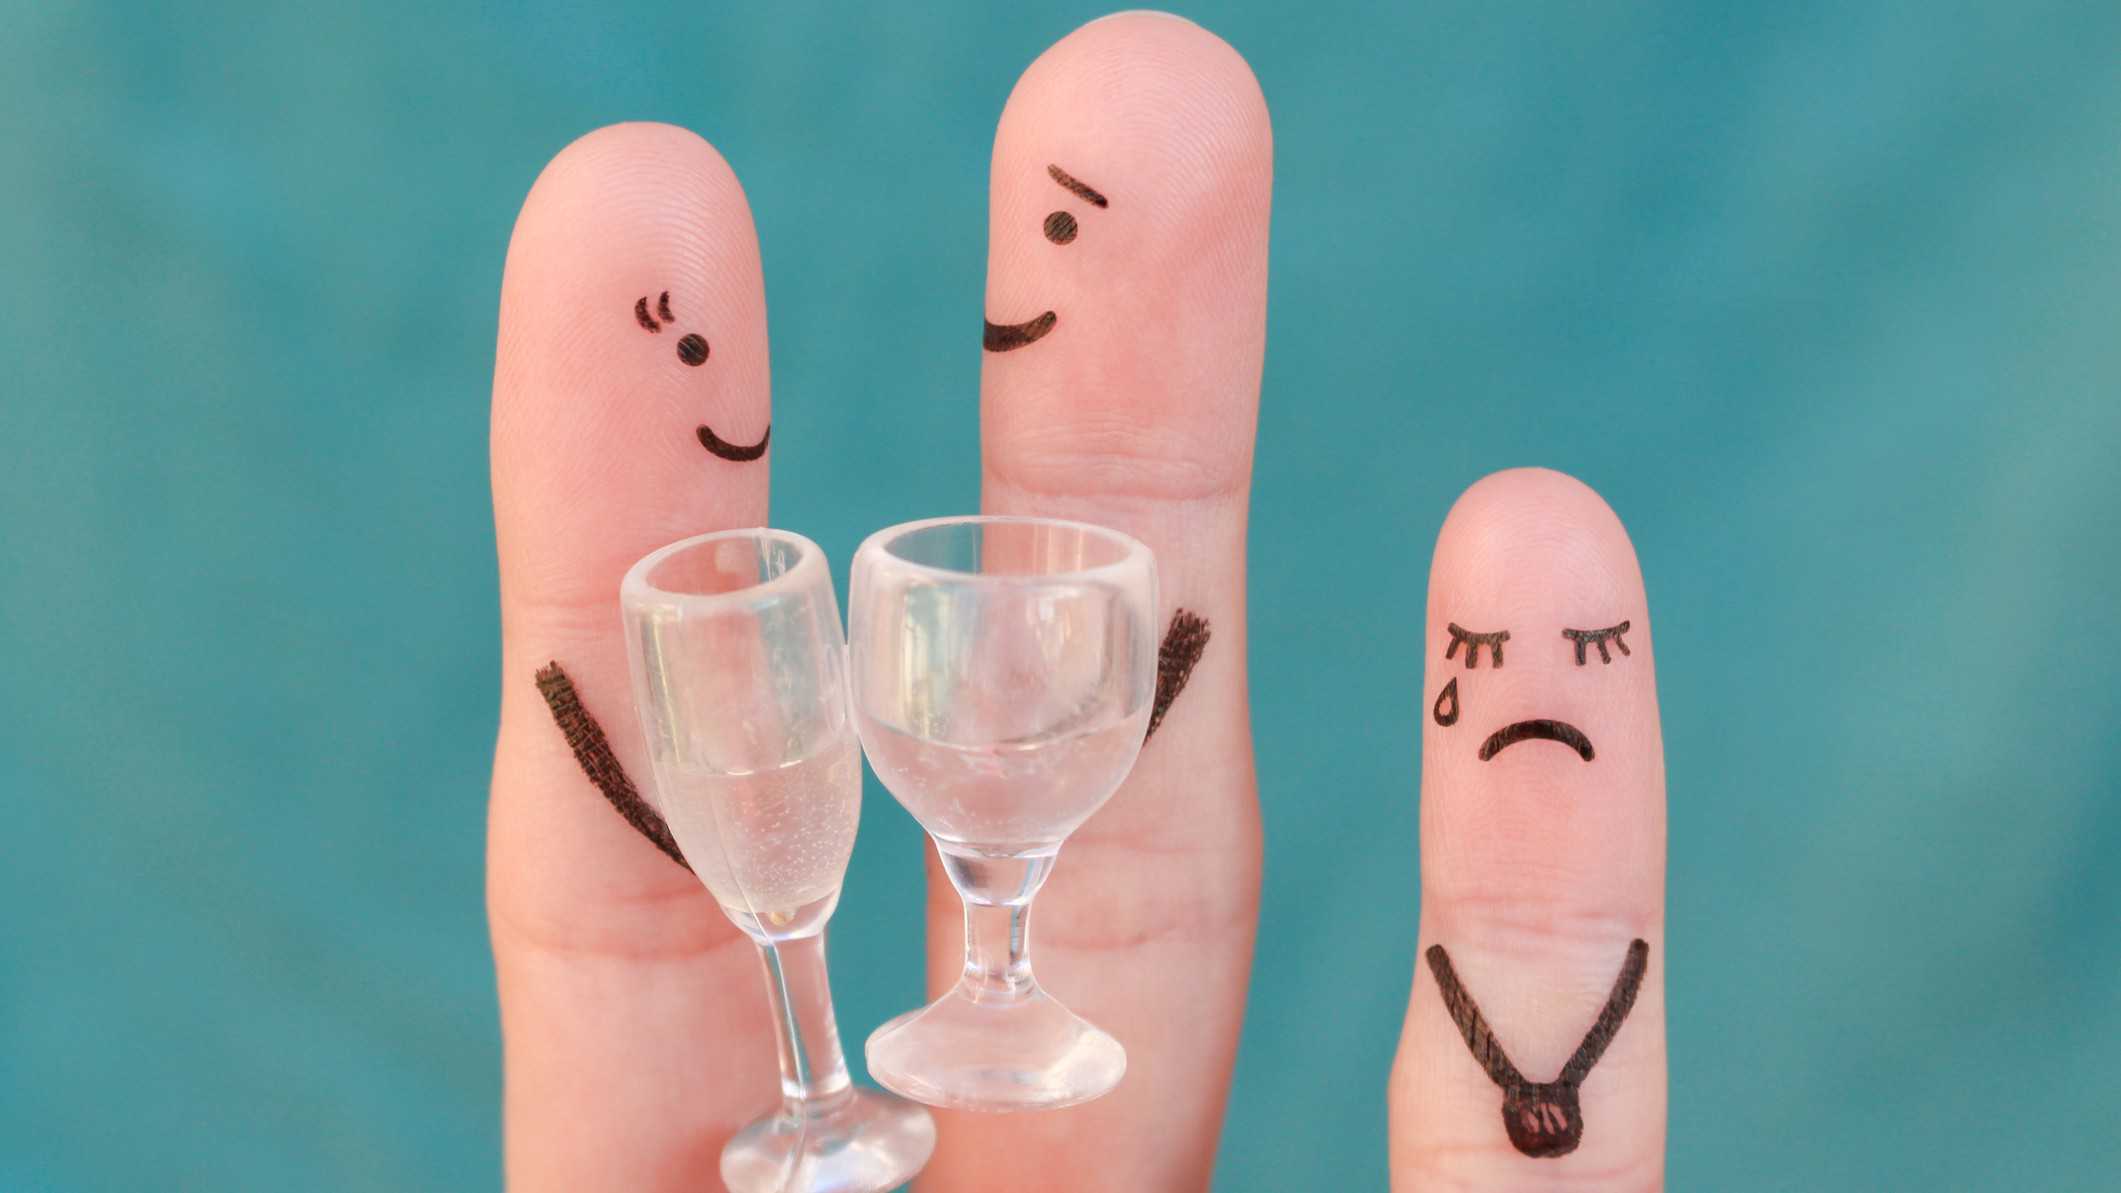 2 fingers with happy faces next to finger drawn with a sad face.